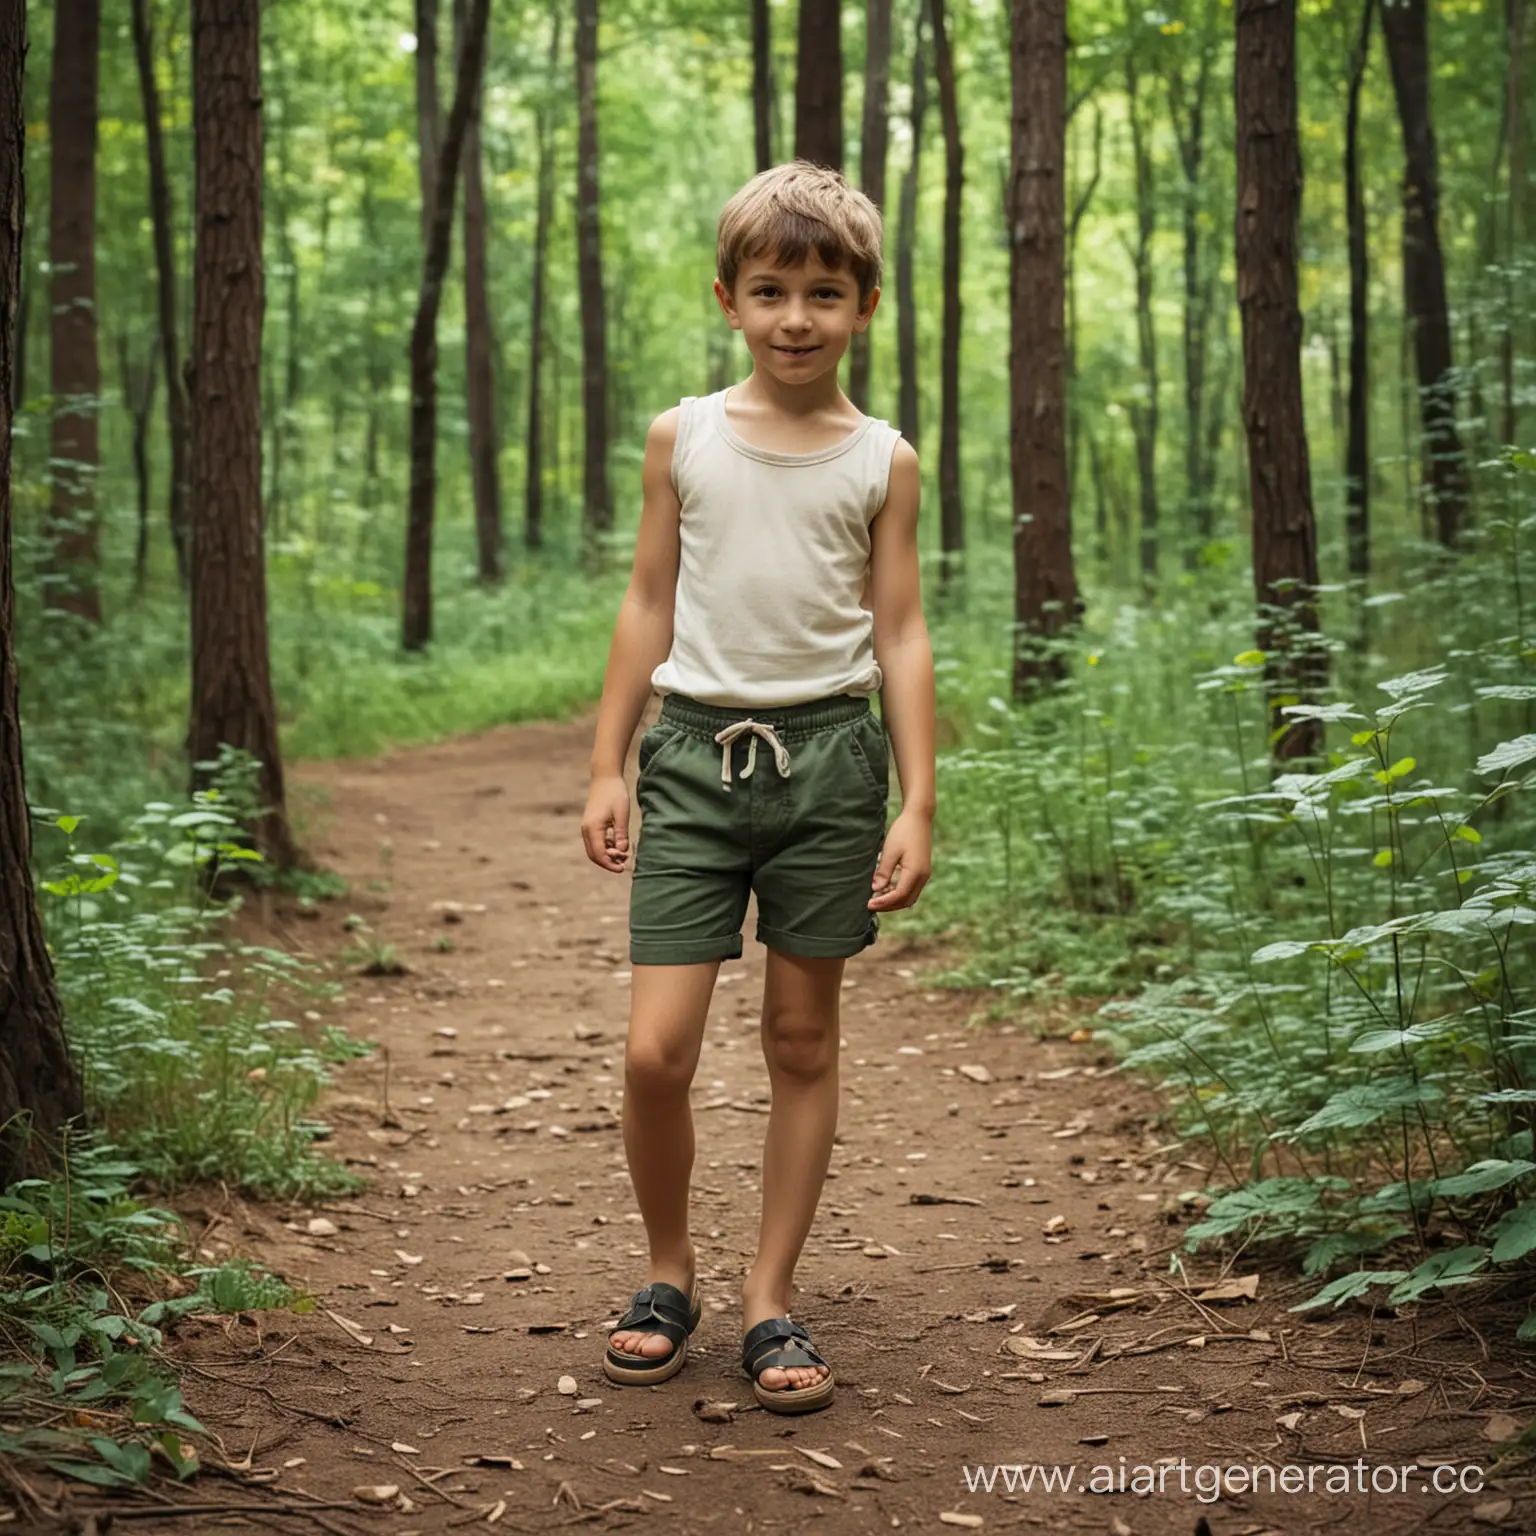 Young-Boy-Exploring-Forest-Wilderness-in-Casual-Attire